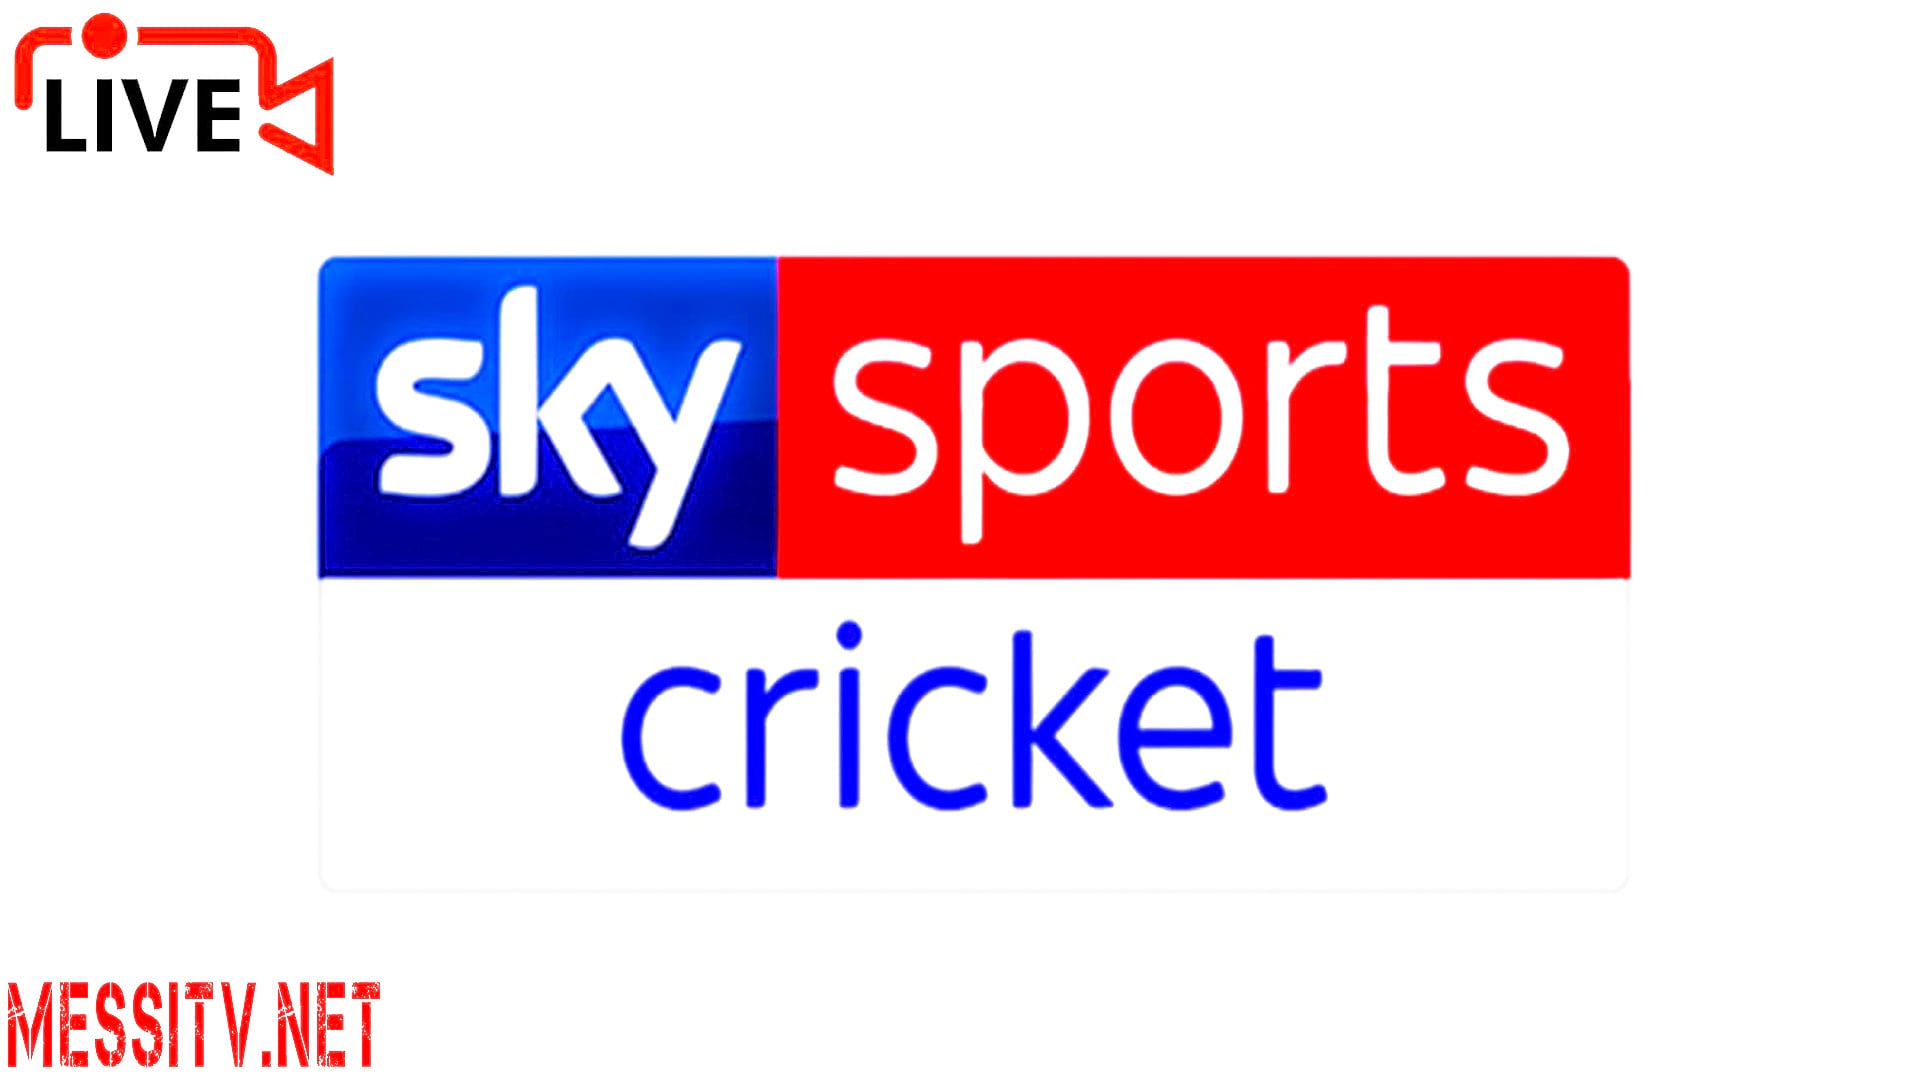 Buy Sky Sports Online Live UP TO 60% OFF